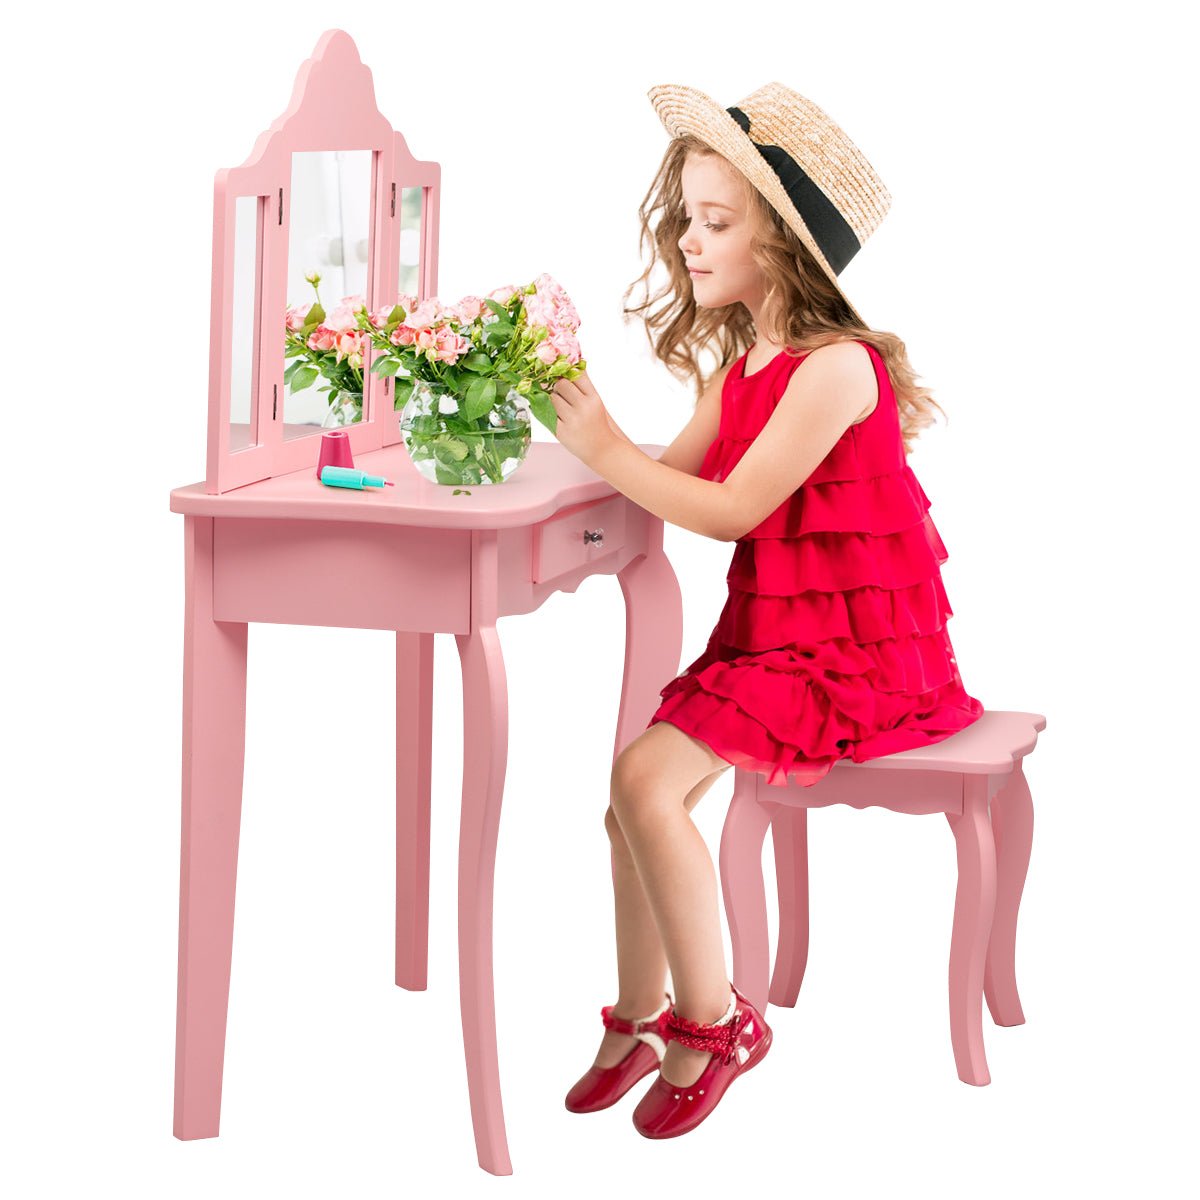 Children's Vanity Table & Mirror Set - Playful Beauty for Ages 3-7